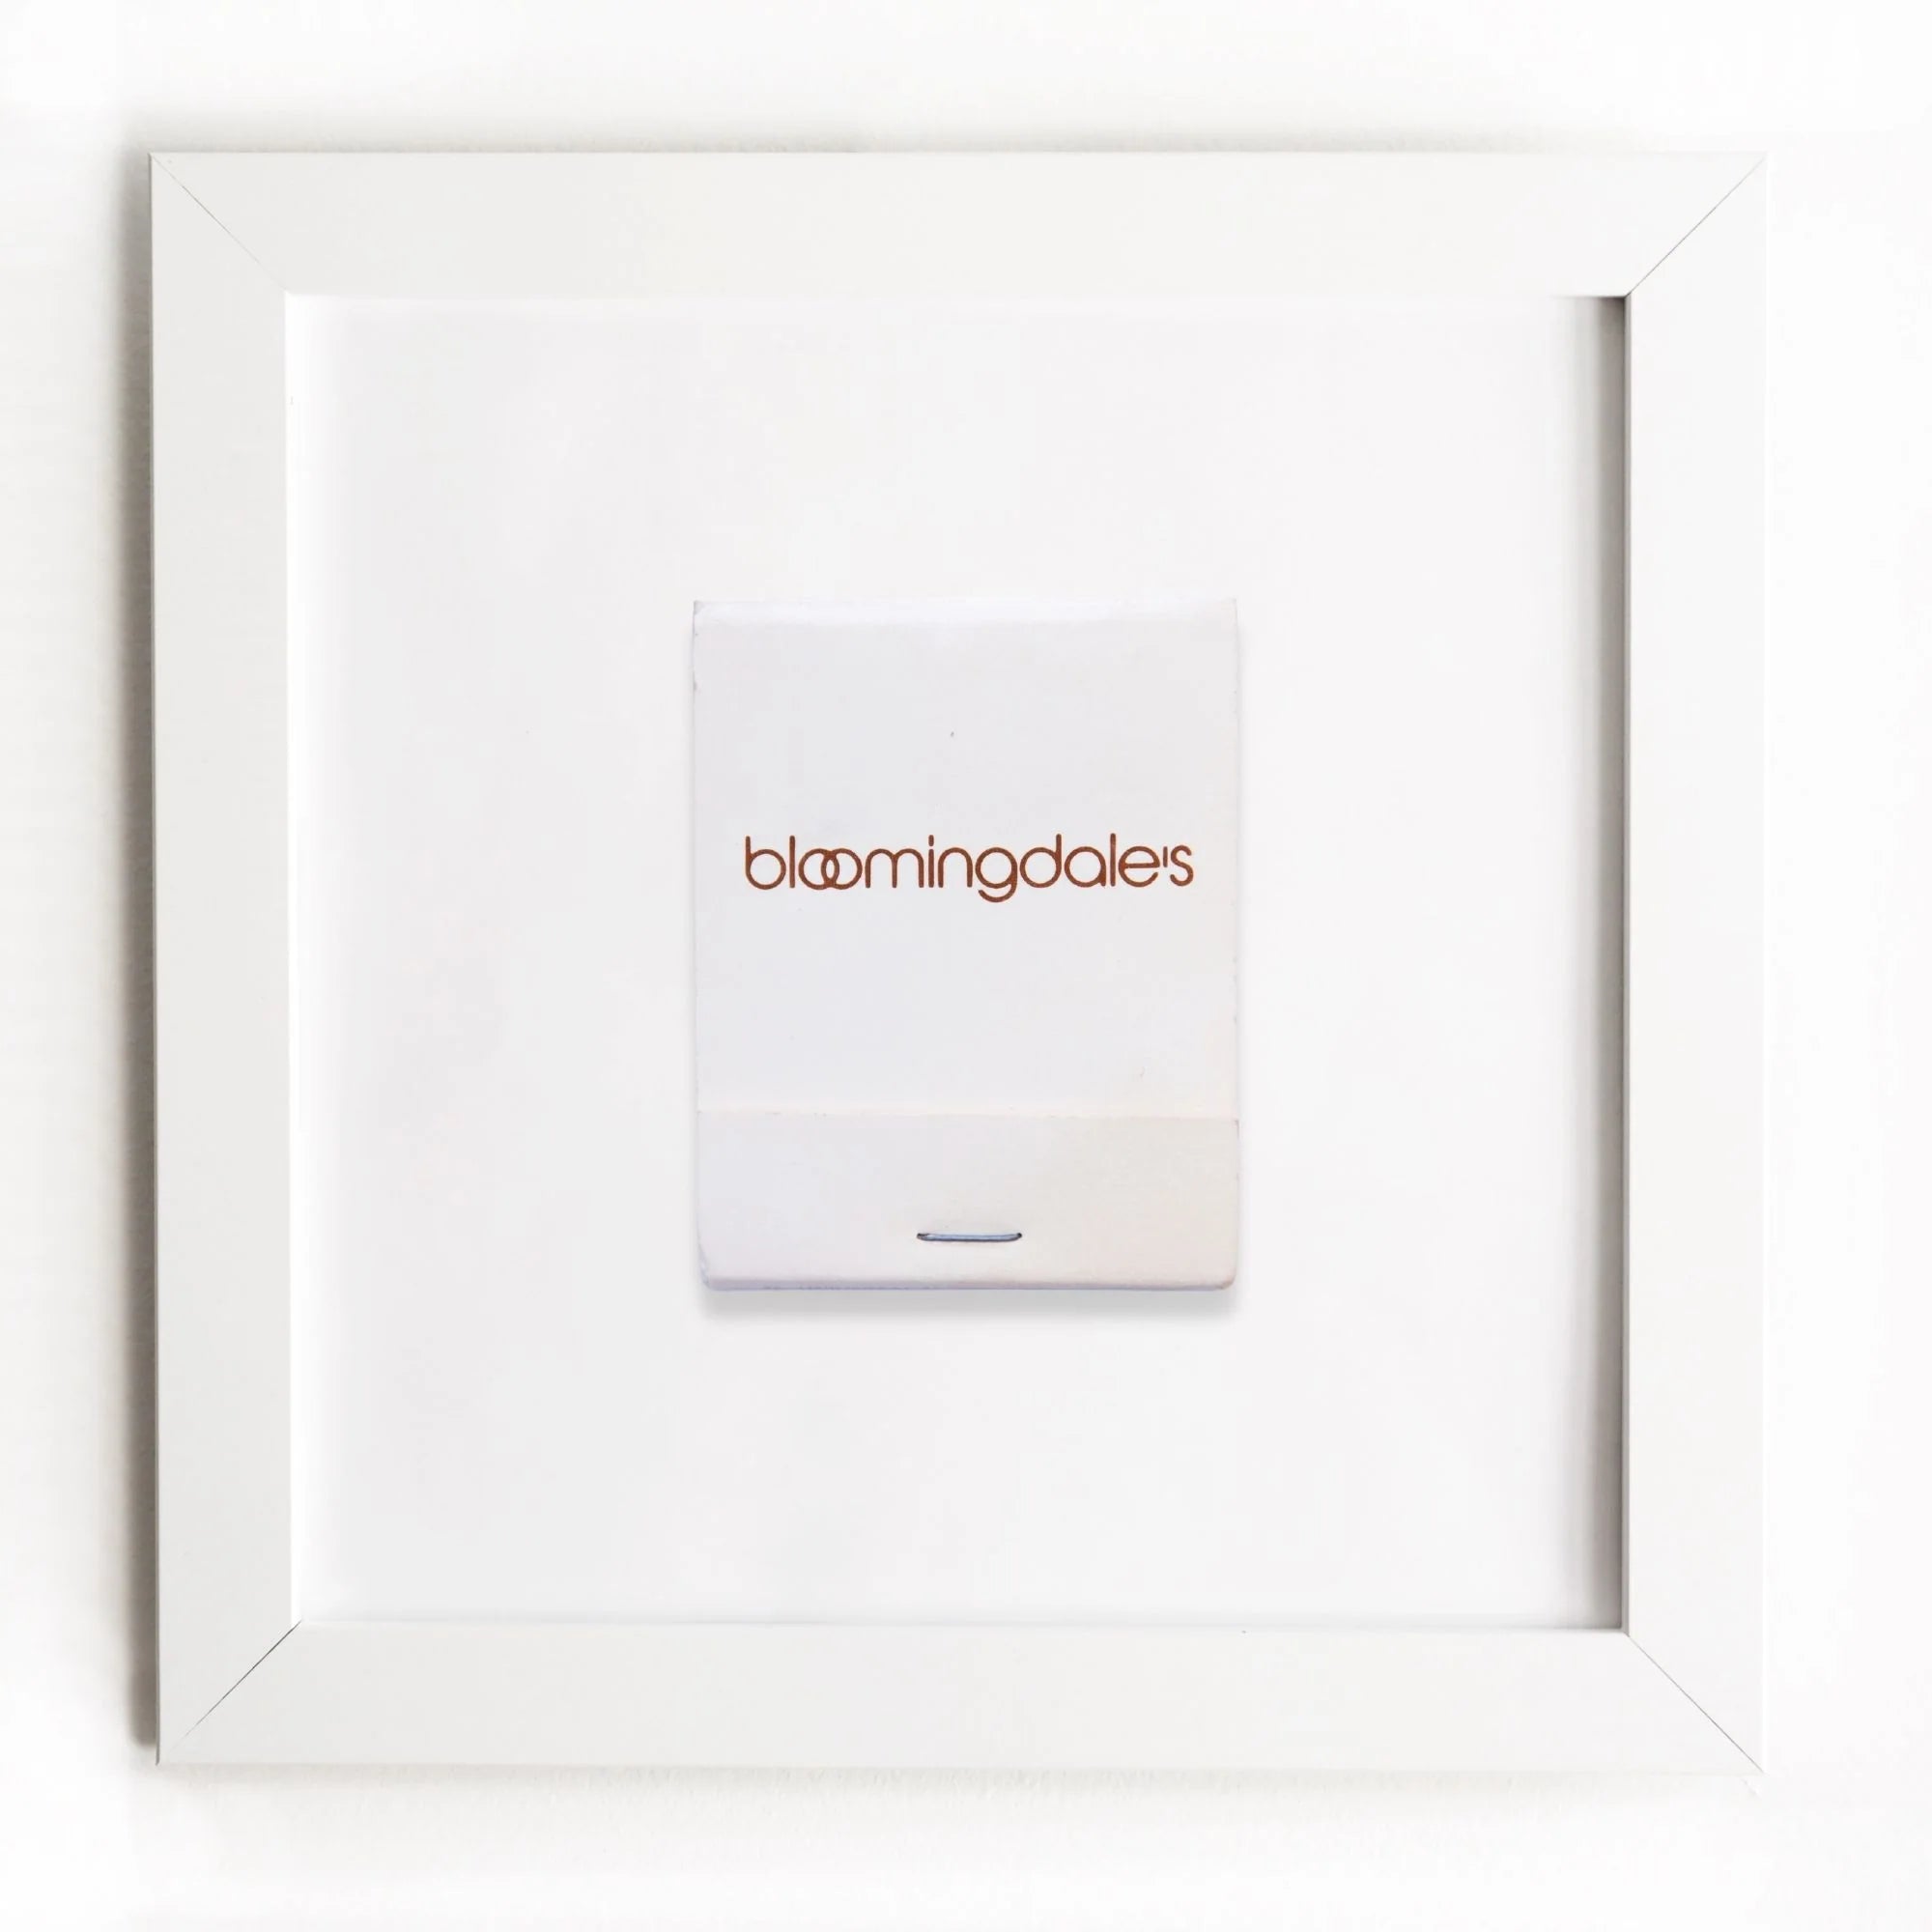 A Match South Art Square White Frame, predominantly white with the store&#39;s logo printed in lowercase, is centered within a simple, square white frame on a plain white background, evoking a minimalist bungalow style.